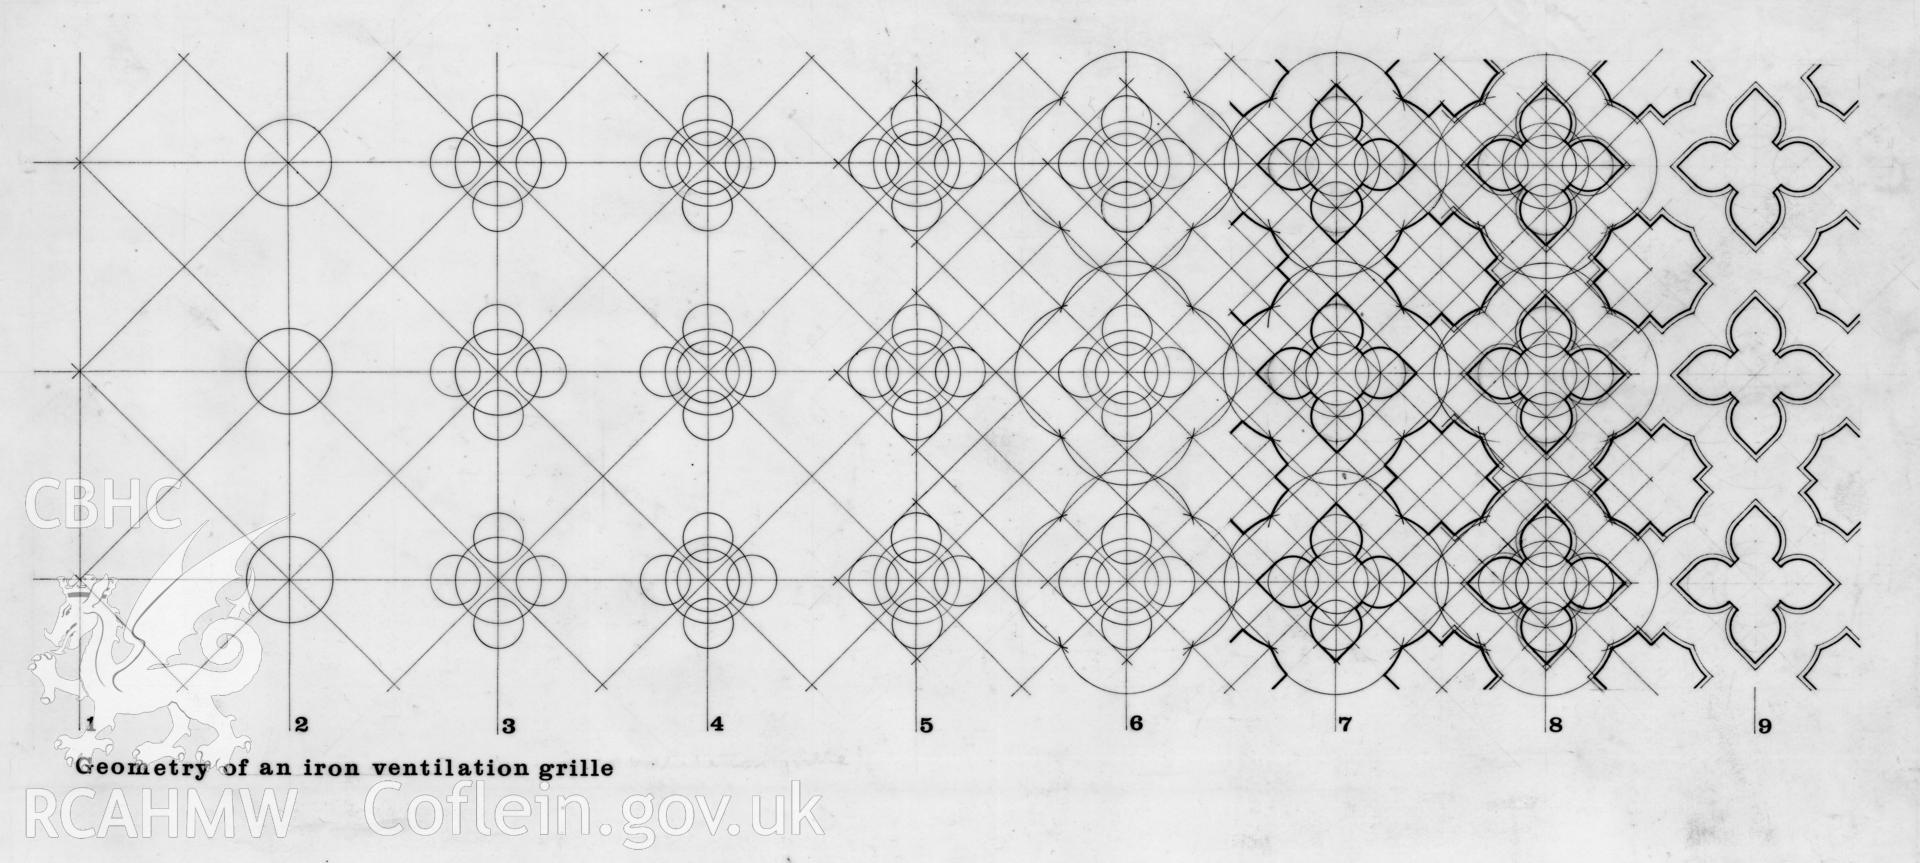 Geometry of Ventilitaion Grille, Spon Street Shop, Coventry: original (ink) tracing.